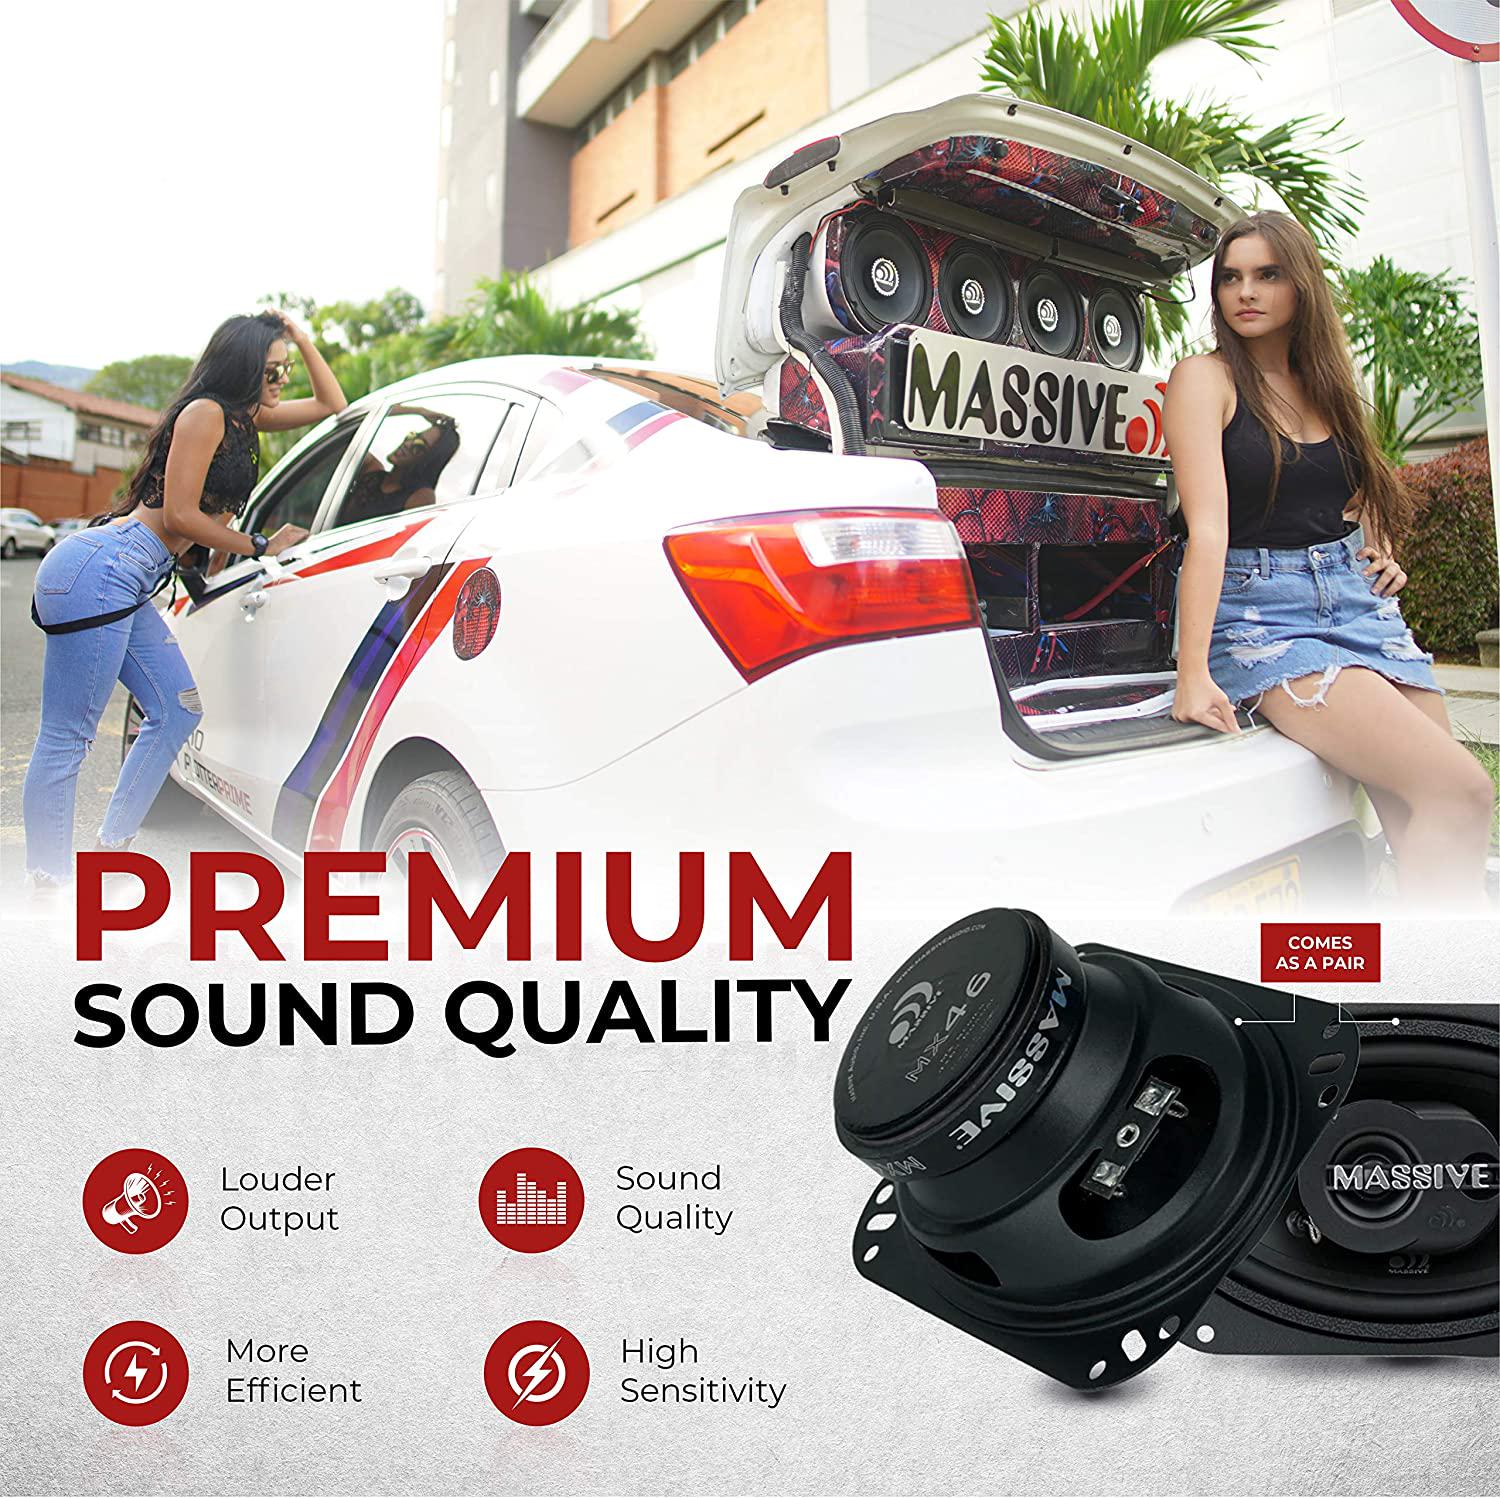 Massive Audio, Massive Audio MX46 MX Series Coaxial Speakers. 80 Watts, 4 Ohm, 40w RMS Heavy Duty 4x6 Inch 2 Way Speakers. Enjoy Crystal Clear Sound with These Great Coaxial Speaker System (Sold in Pairs)